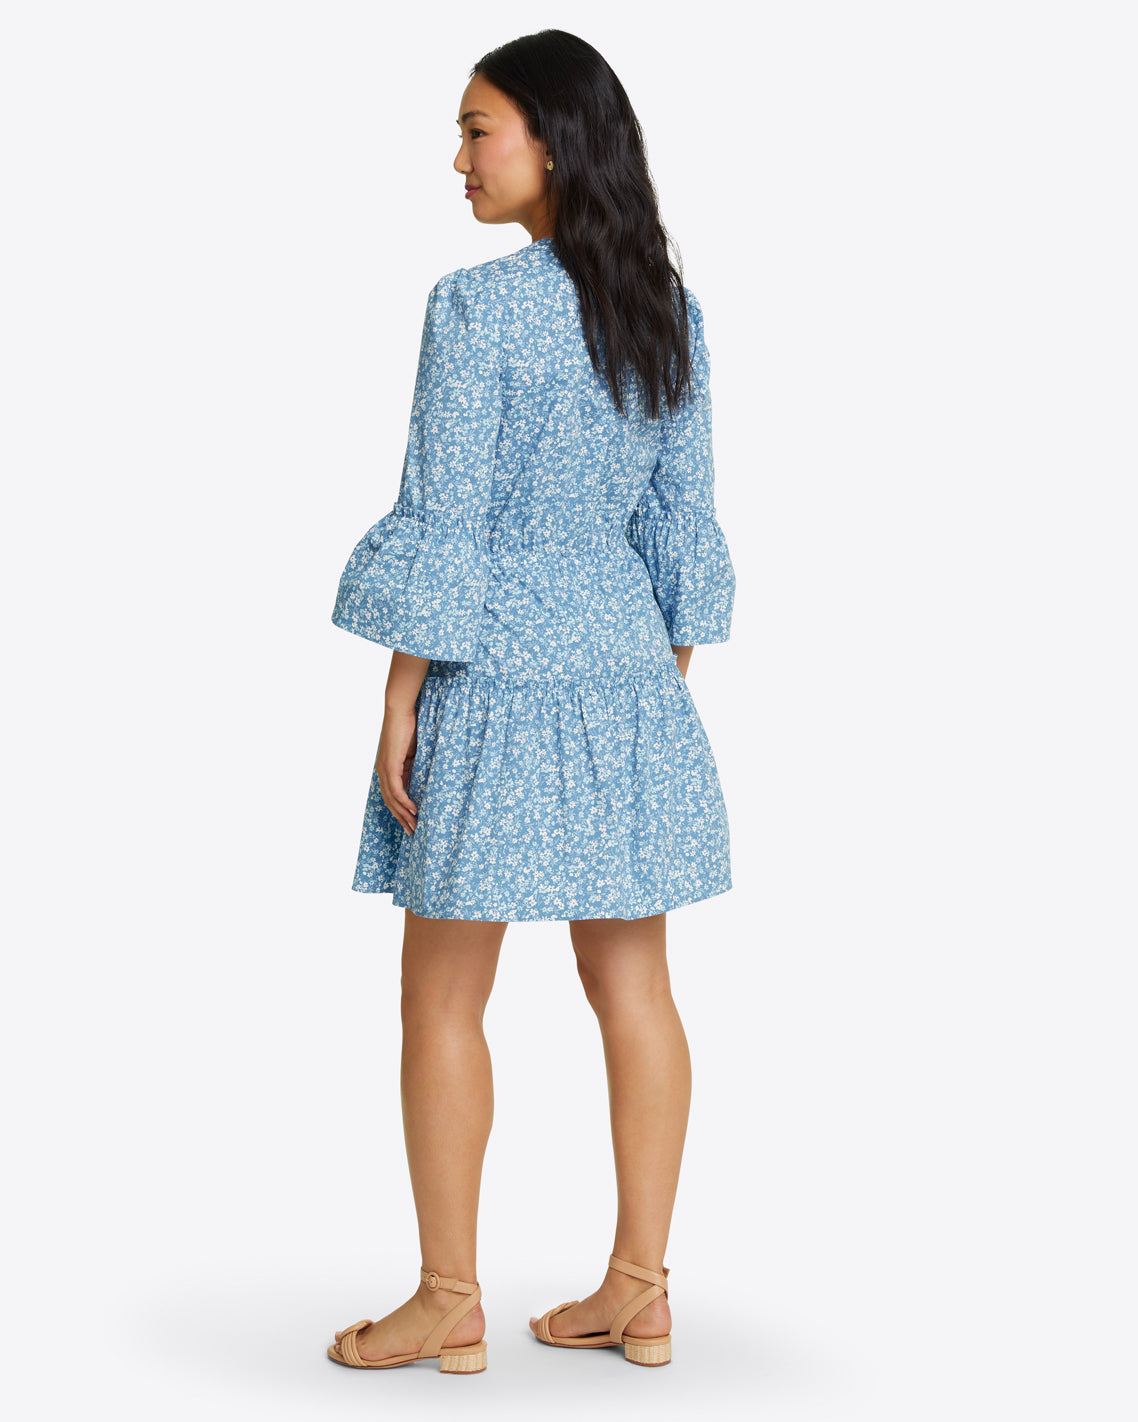 Avery Shirtdress in Bluebell Floral